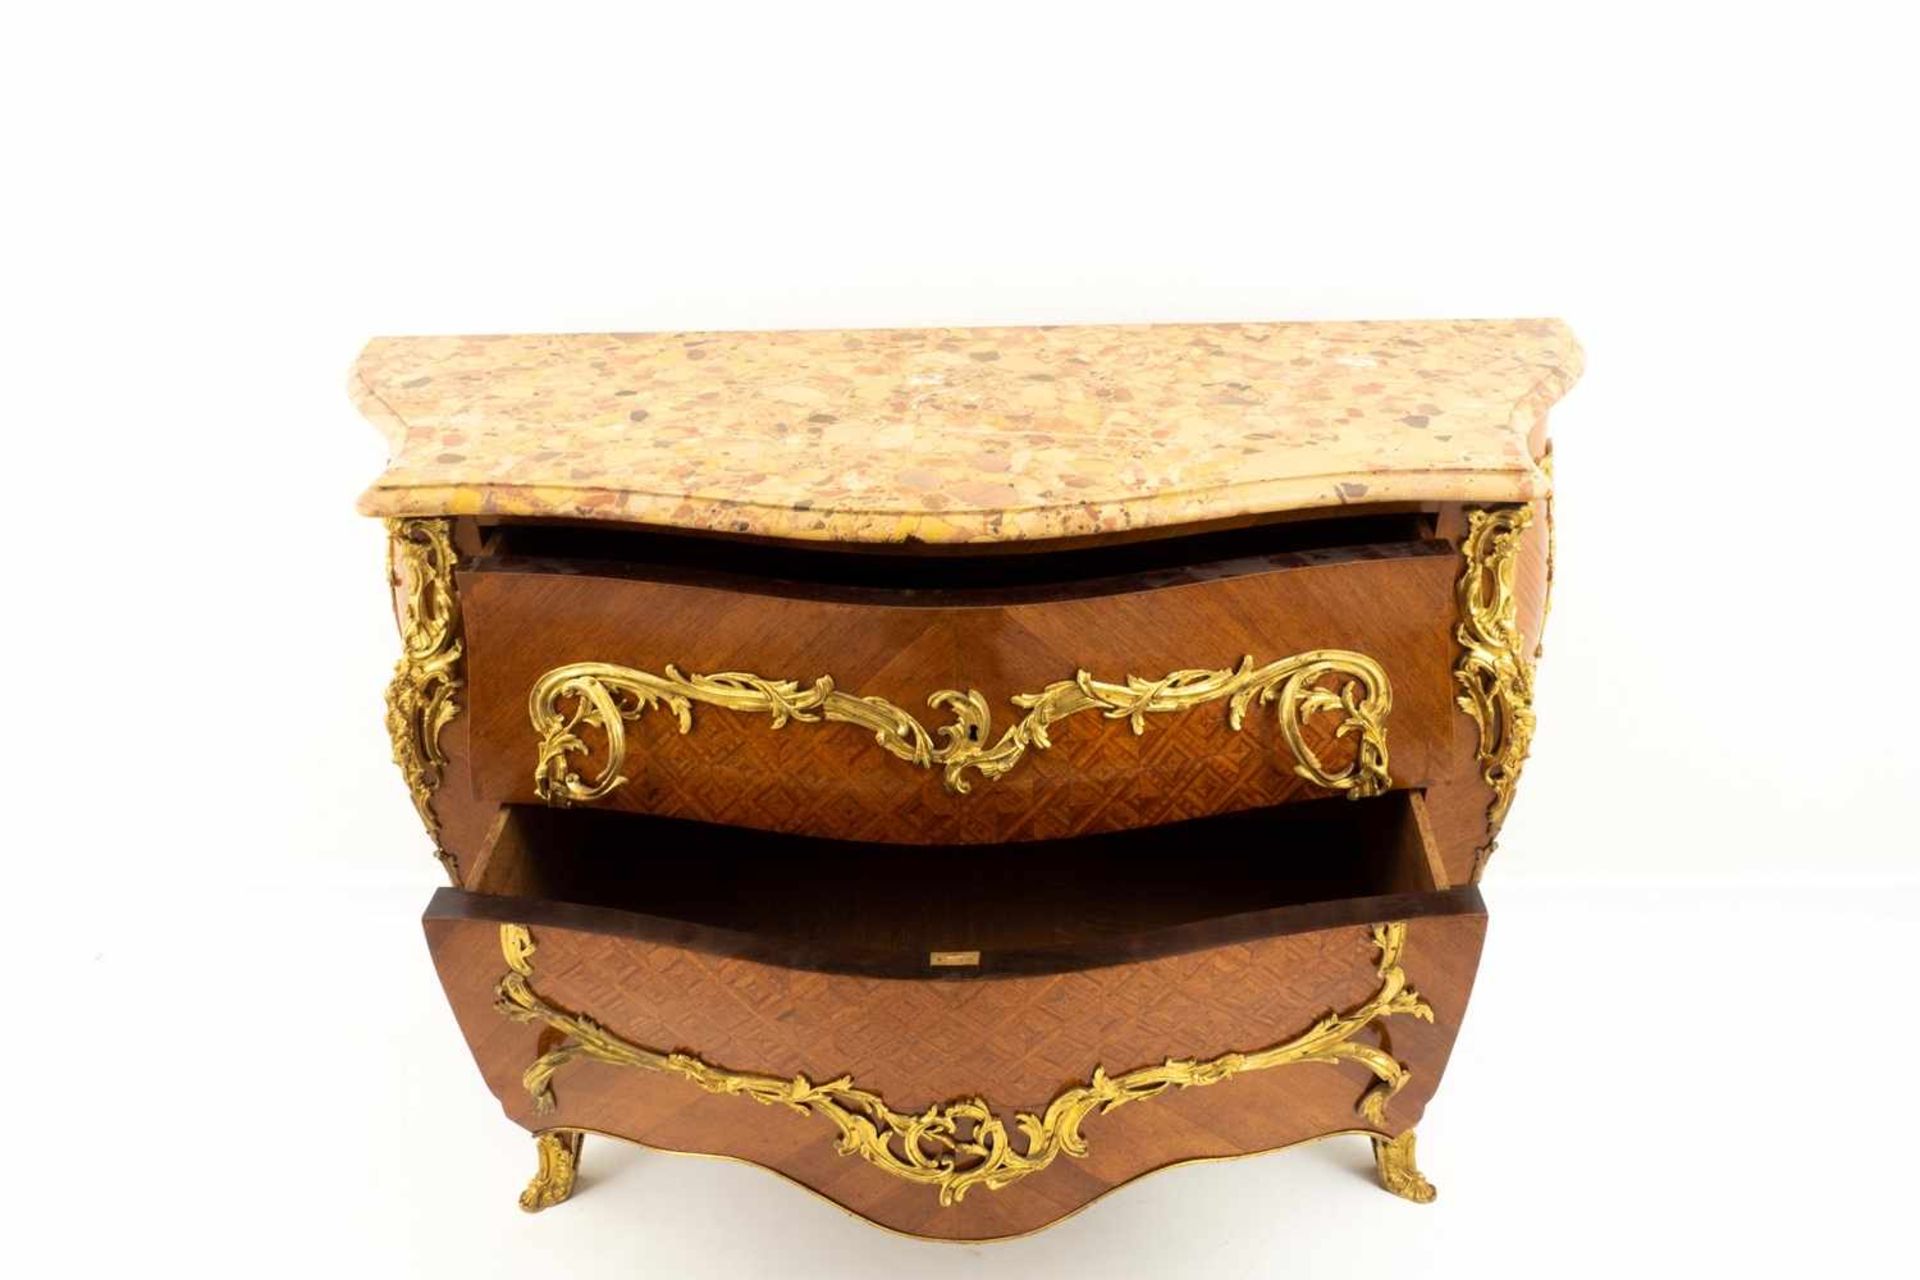 Bulging ornate chest of drawers with bronze appliqué< - Image 3 of 8